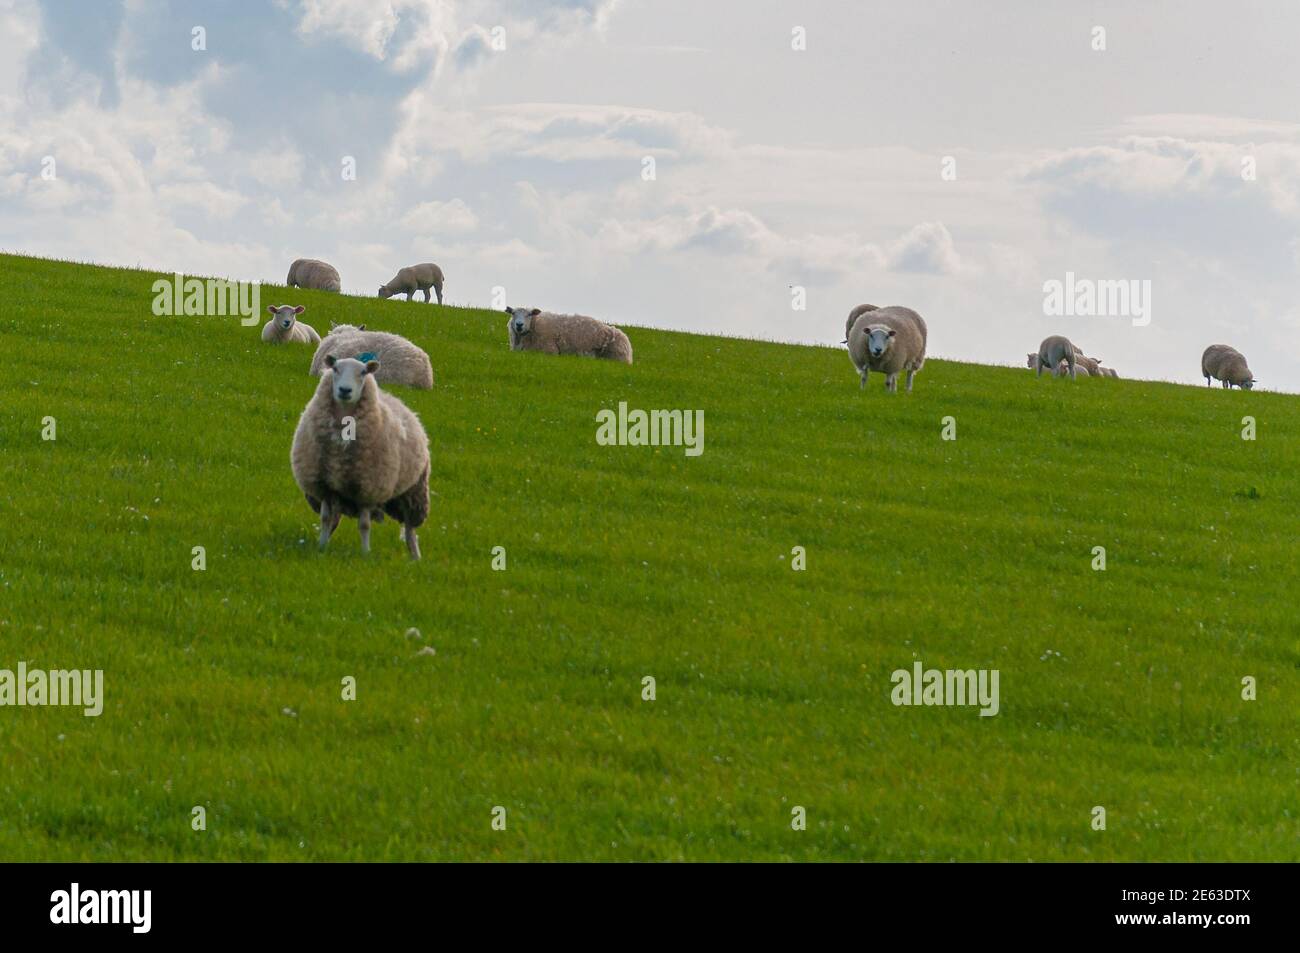 Flock of grazing sheep on a hill, Scotland. Concept: animal life, national symbol, life on farms, wool production Stock Photo